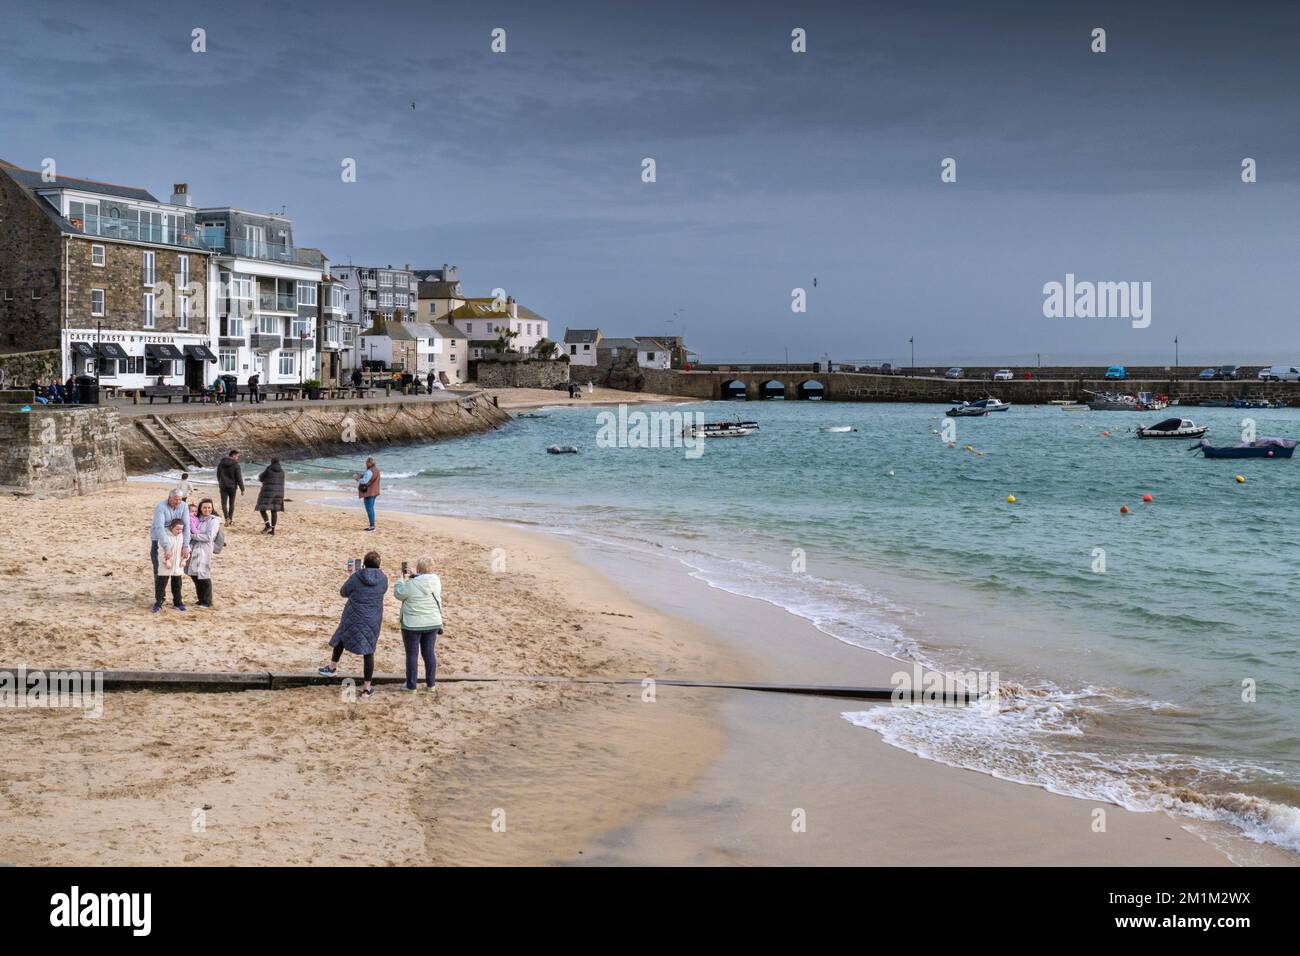 UK weather. Visitors on the beach on a rainy chilly miserable day in the historic seaside town of St Ives in Cornwall in England in the UK. Stock Photo